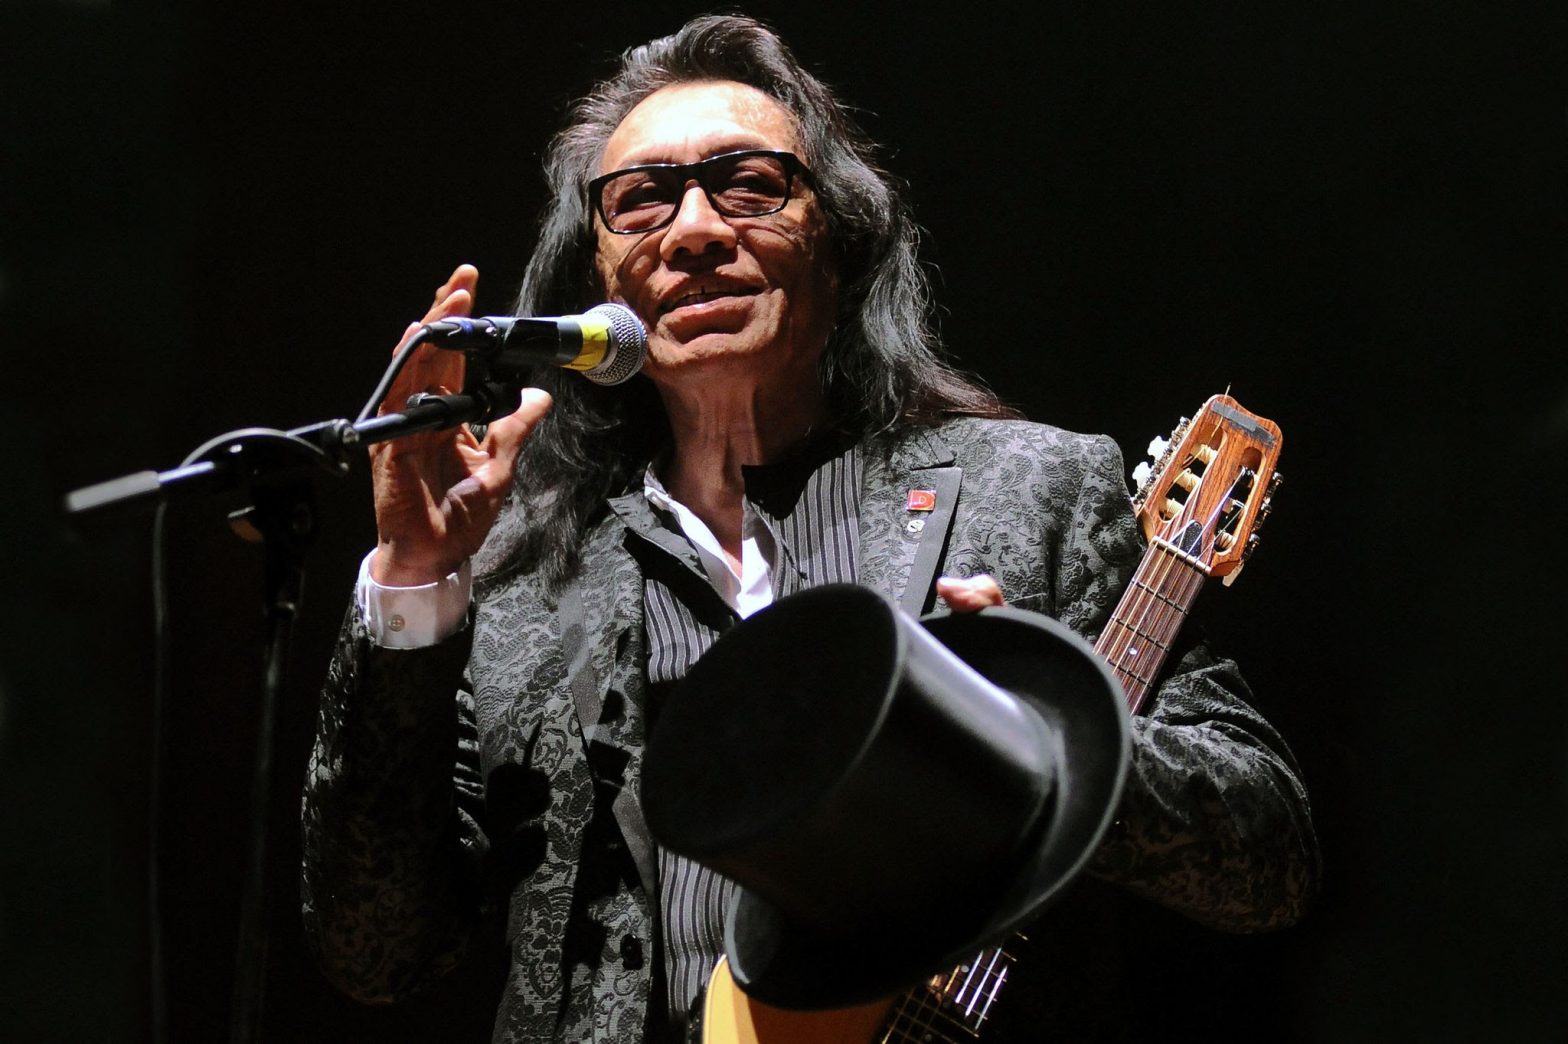 Who was Sixto Rodriguez? Net worth, age, wife Konny Rodriguez, career, family and more